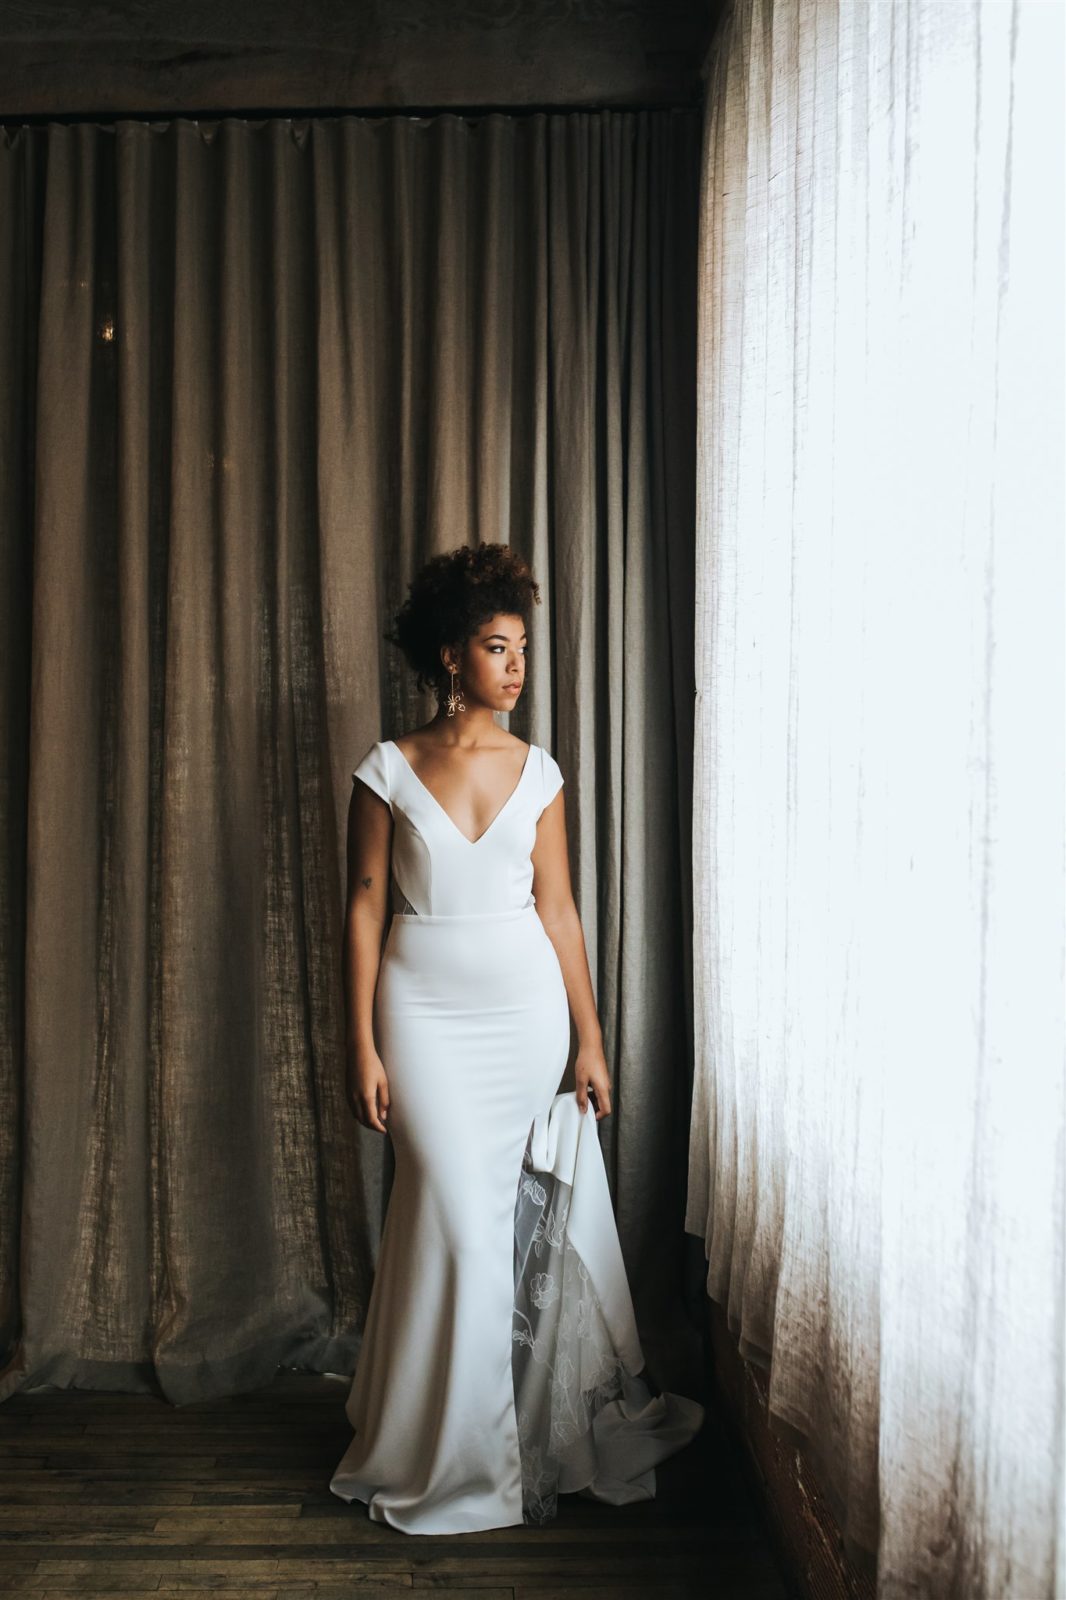 Sexy and sleep modern mid-century bridal inspiration with a gown from Anais Anette